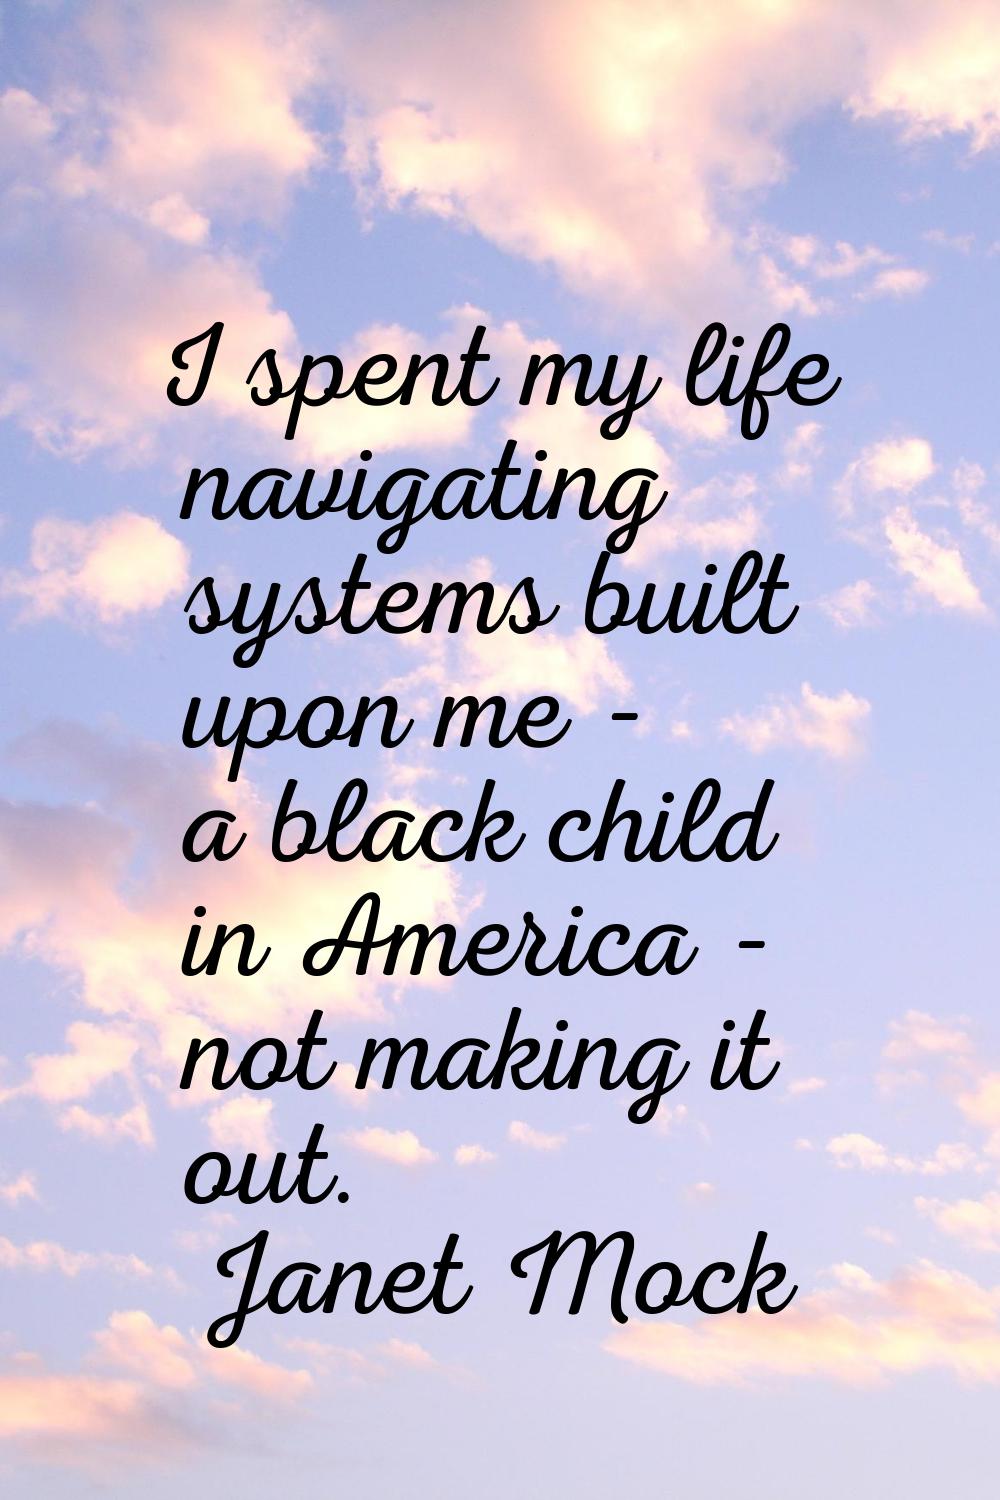 I spent my life navigating systems built upon me - a black child in America - not making it out.